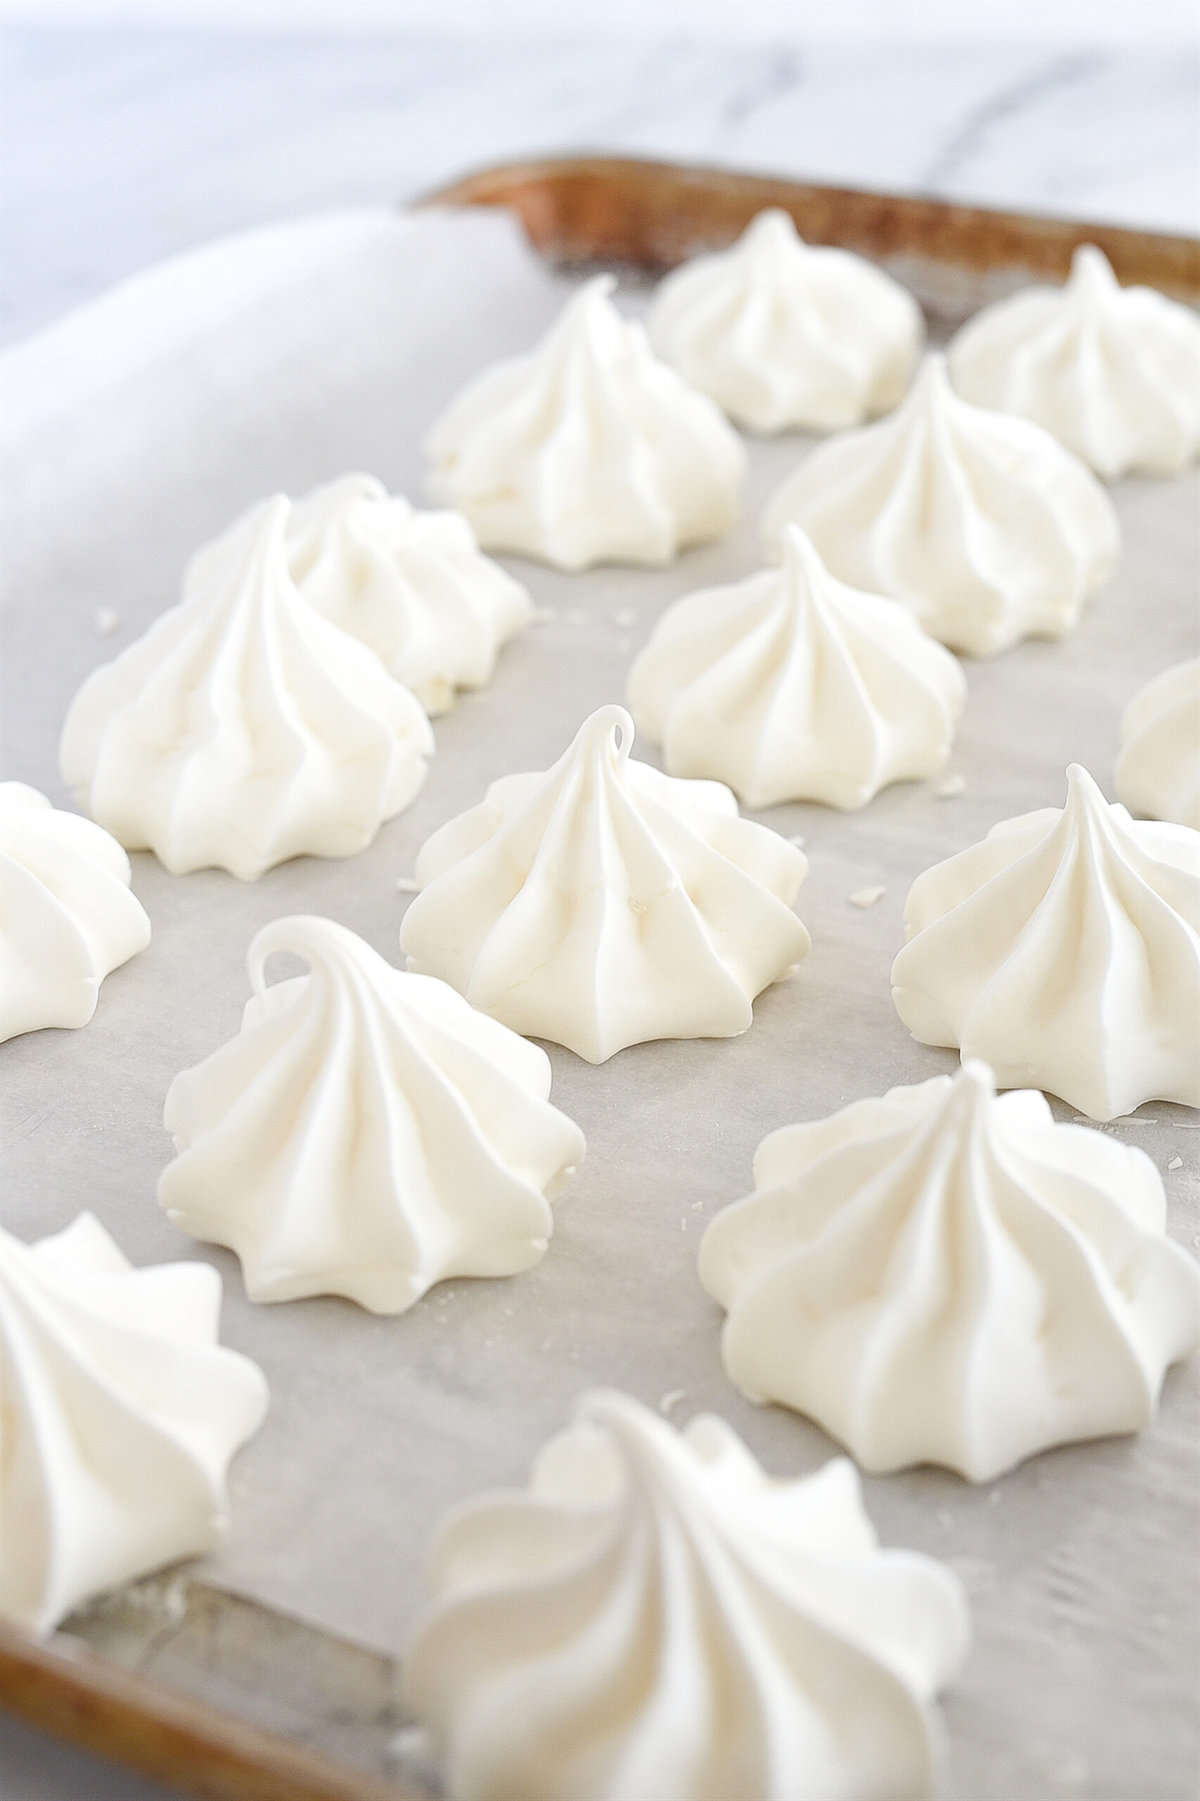 baked meringues on a cookie sheet